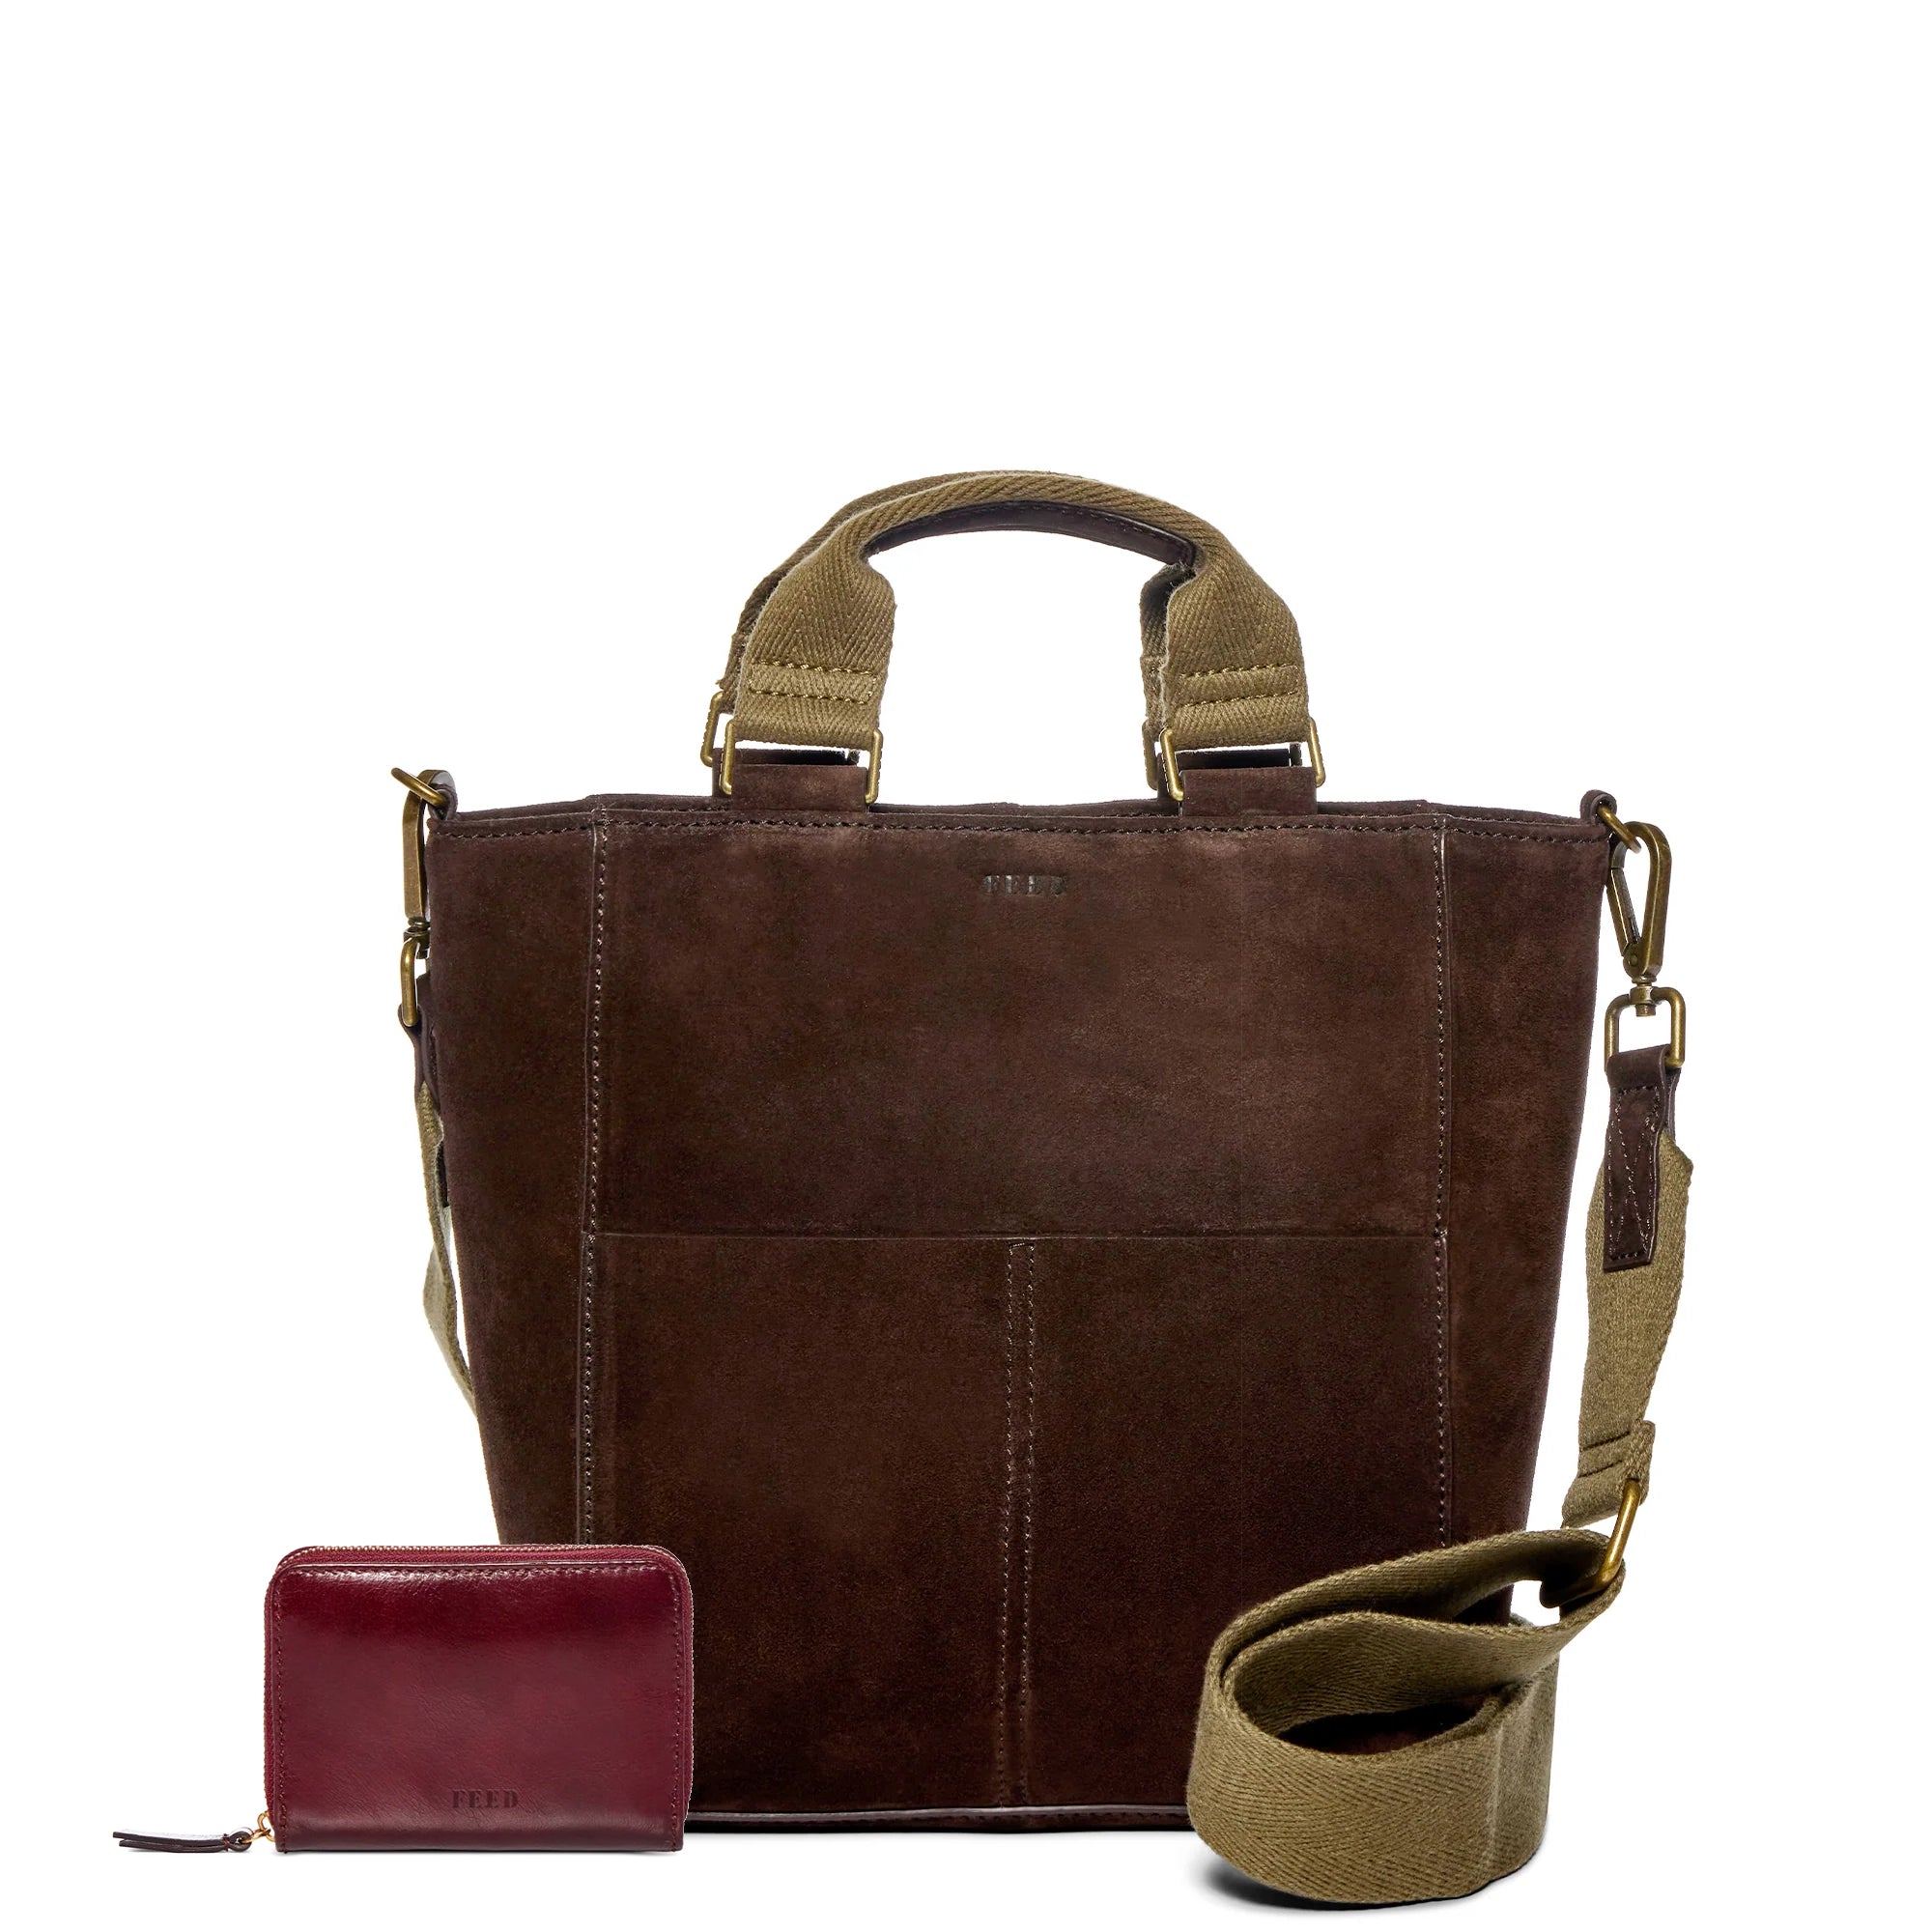 Suede / Burgundy | front image of wallet and bucket bag